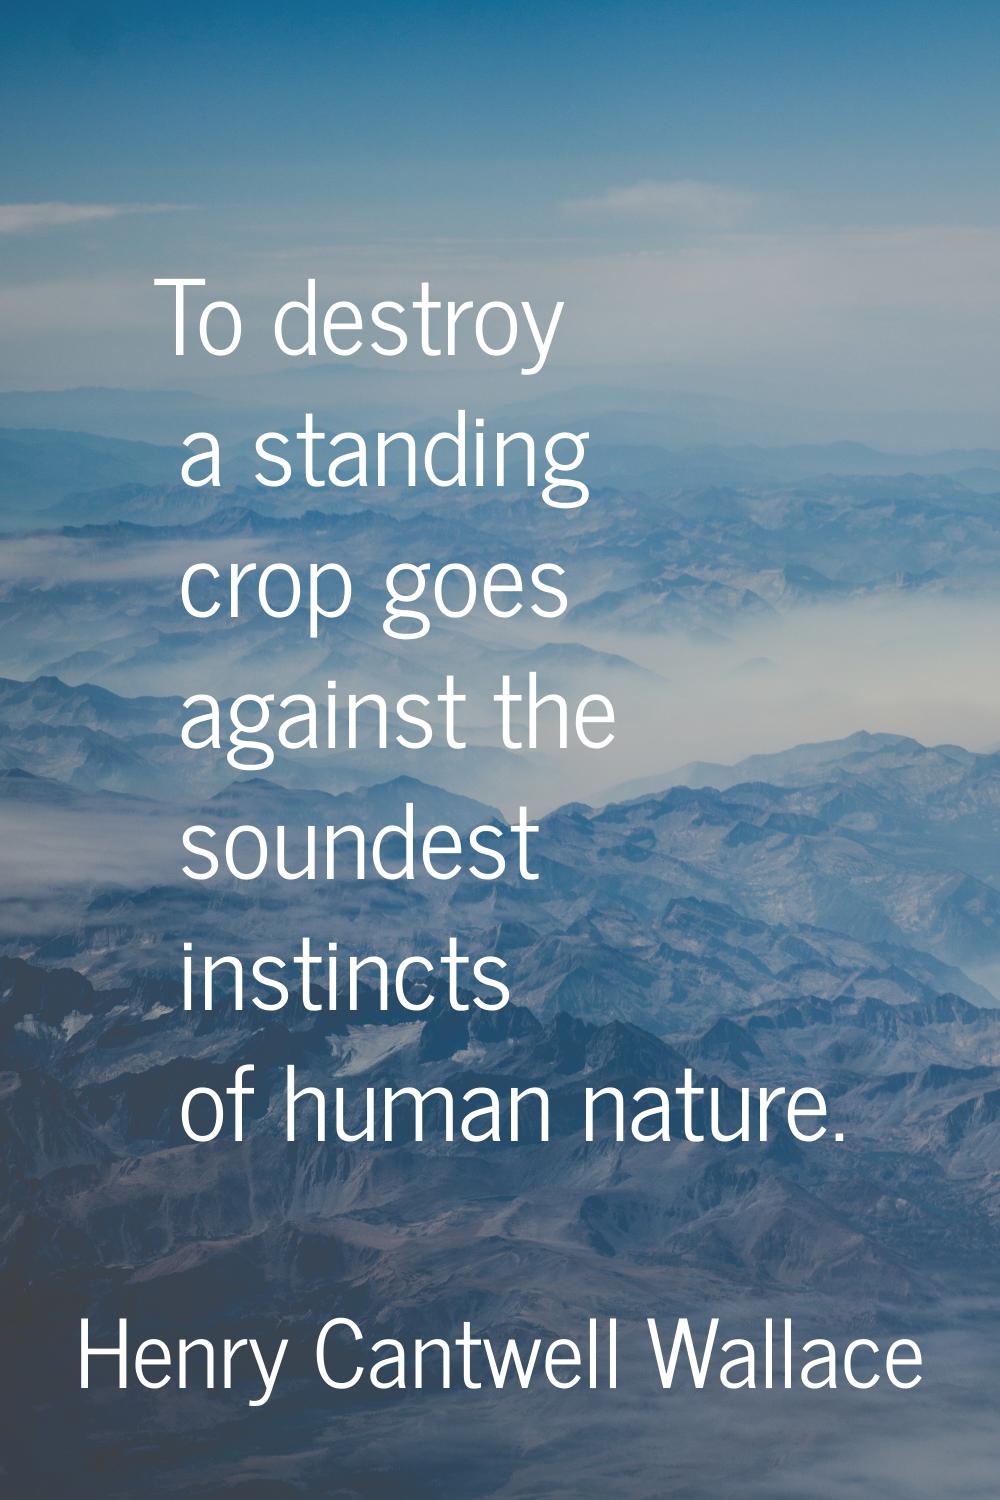 To destroy a standing crop goes against the soundest instincts of human nature.